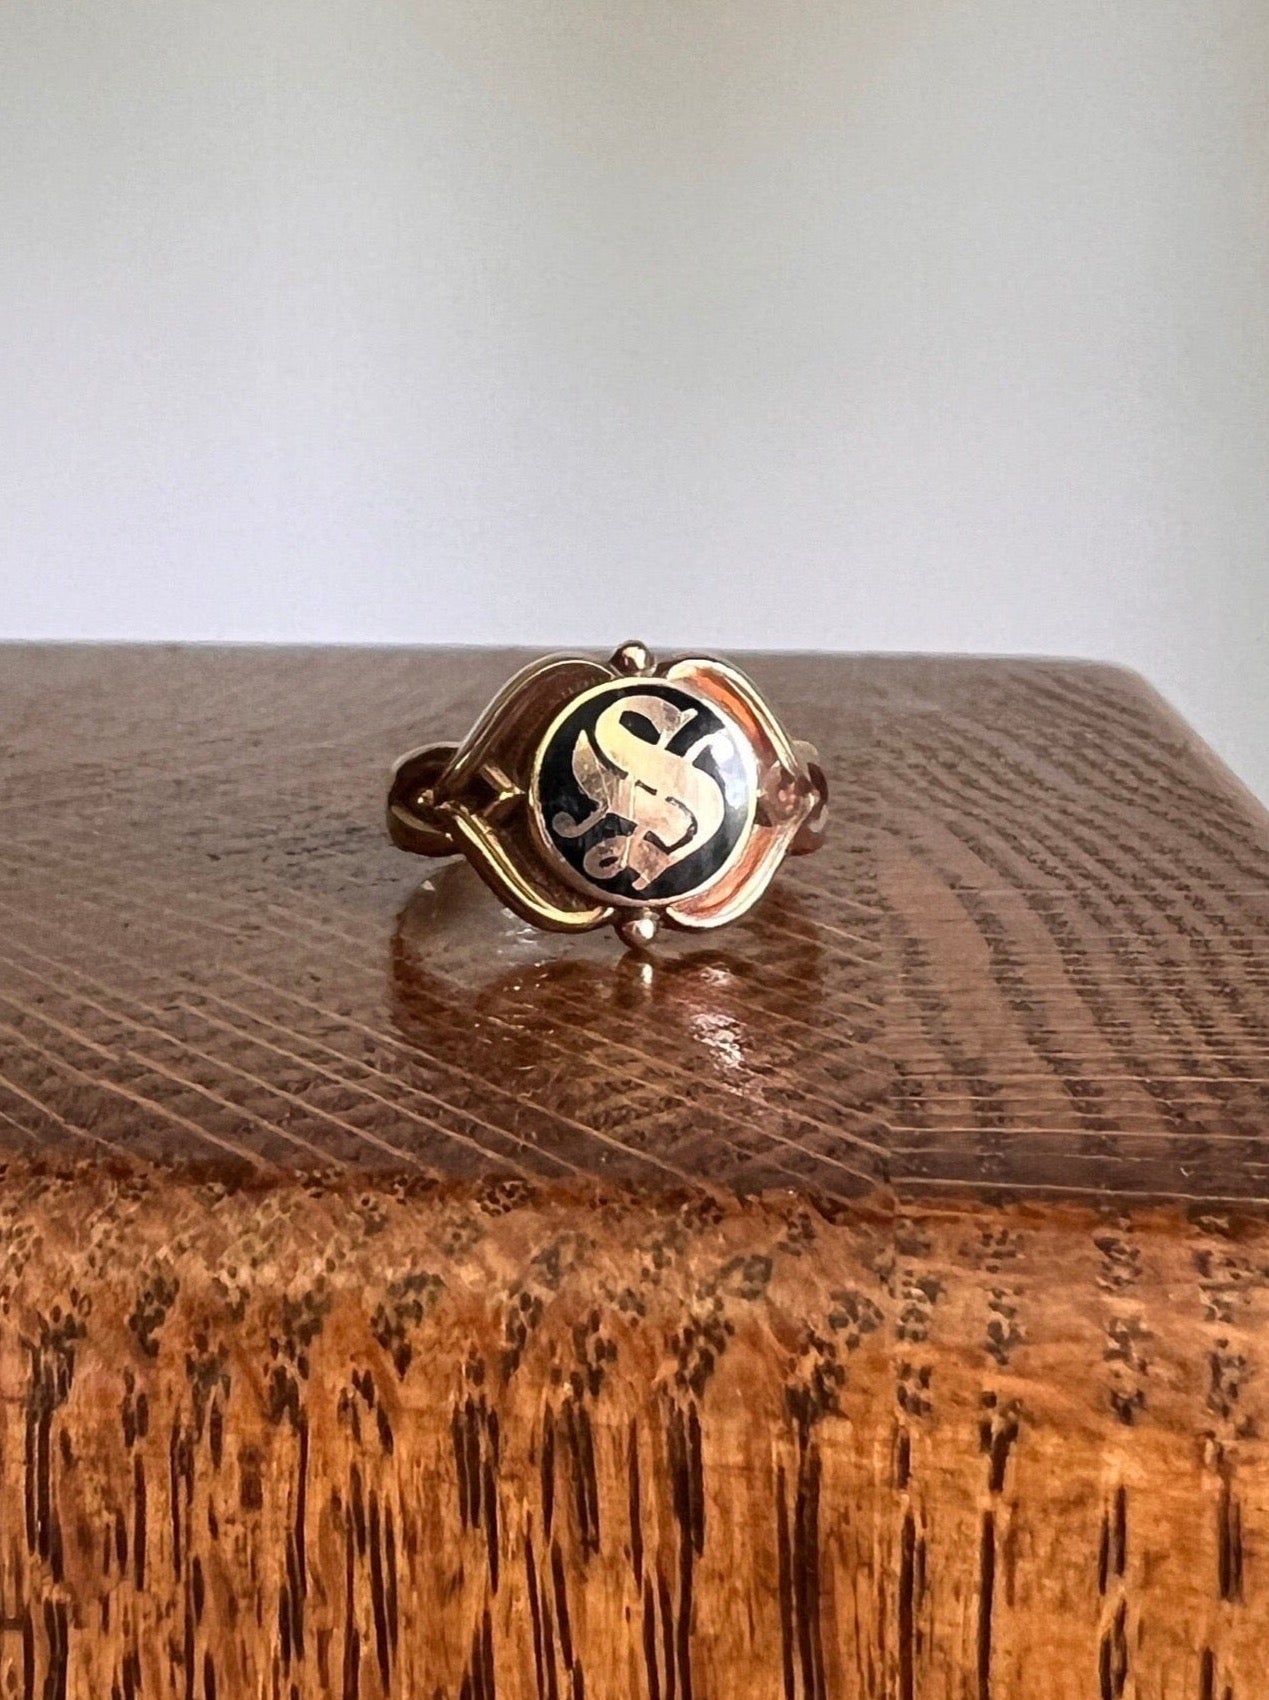 INITIAL S Signet Letter Ring Black Enamel Victorian Antique 10k Gold Solid Ring Stacker Romantic Gift Chunky Sturdy Circle Unisex Man Woman